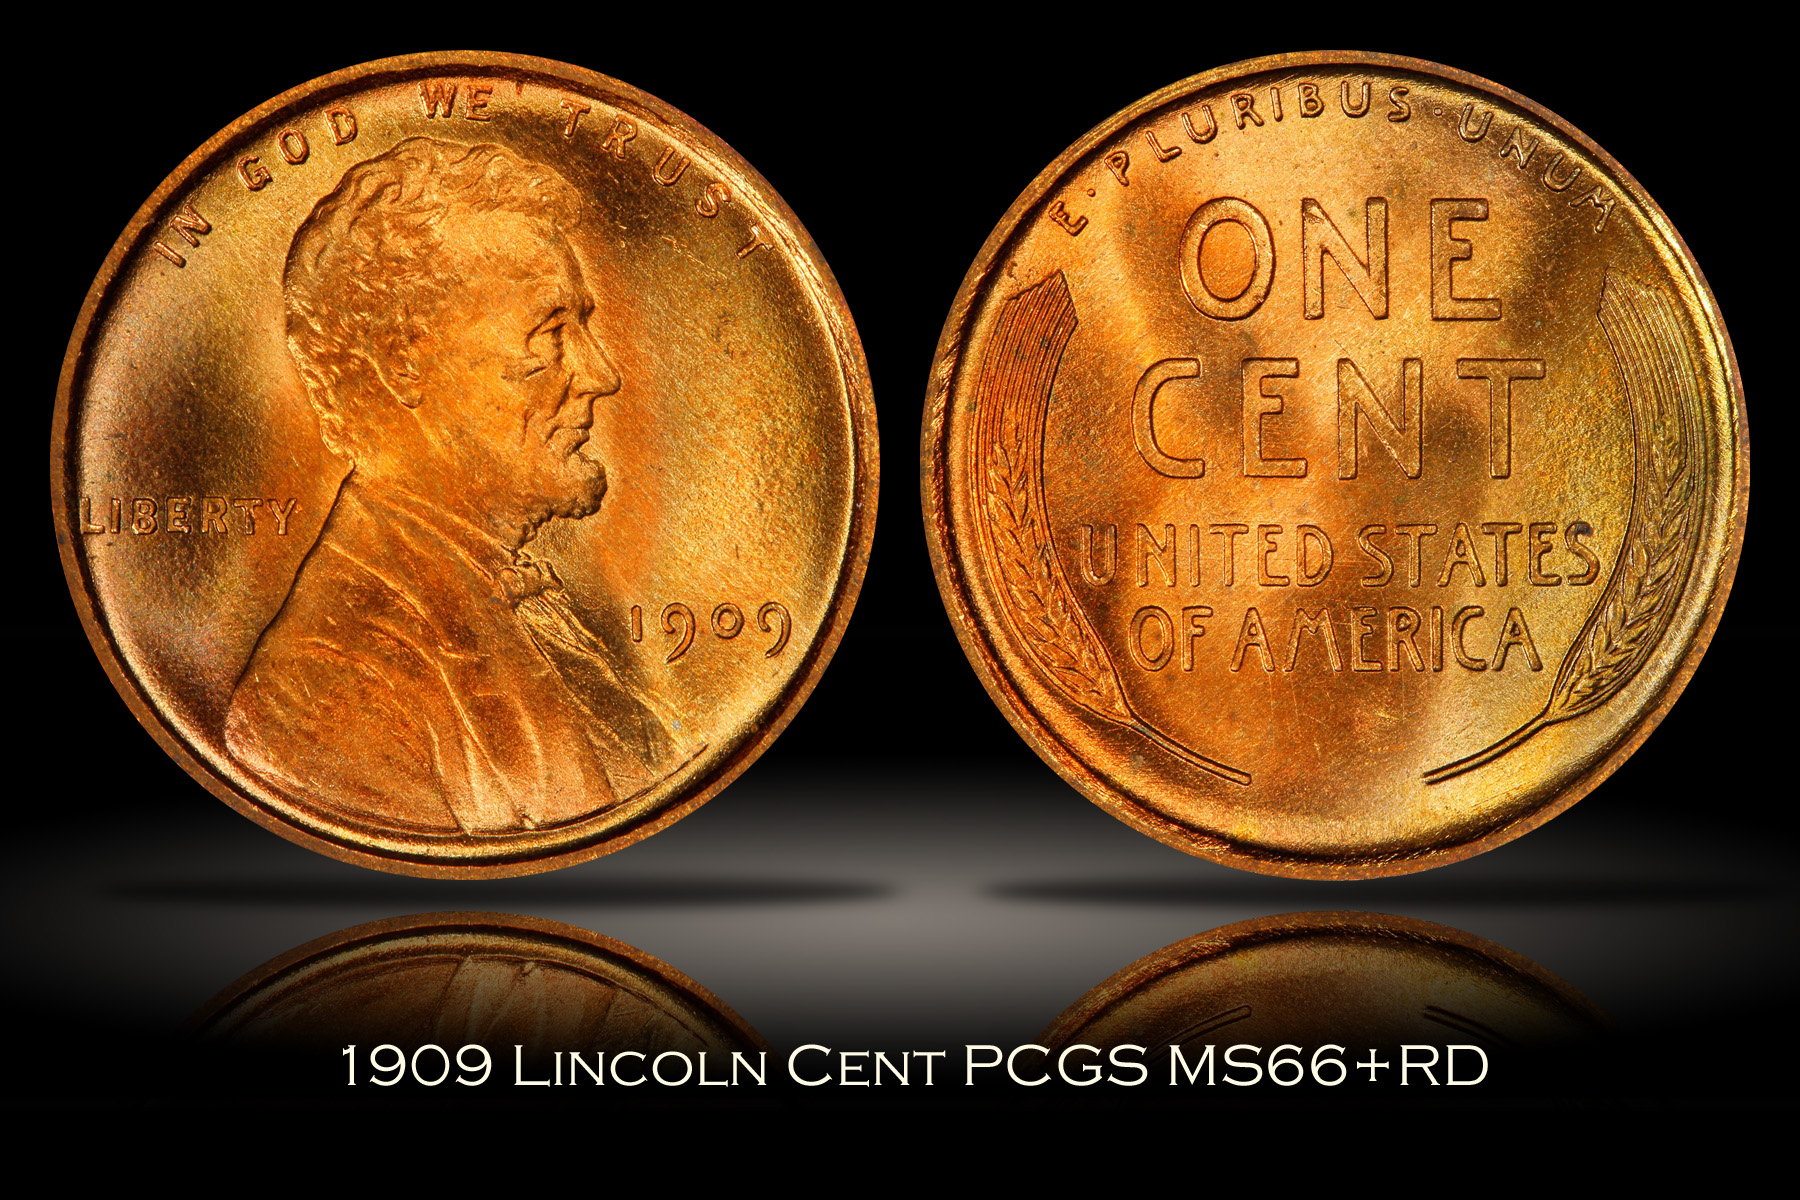 1909 Lincoln Cent PCGS MS66+RD